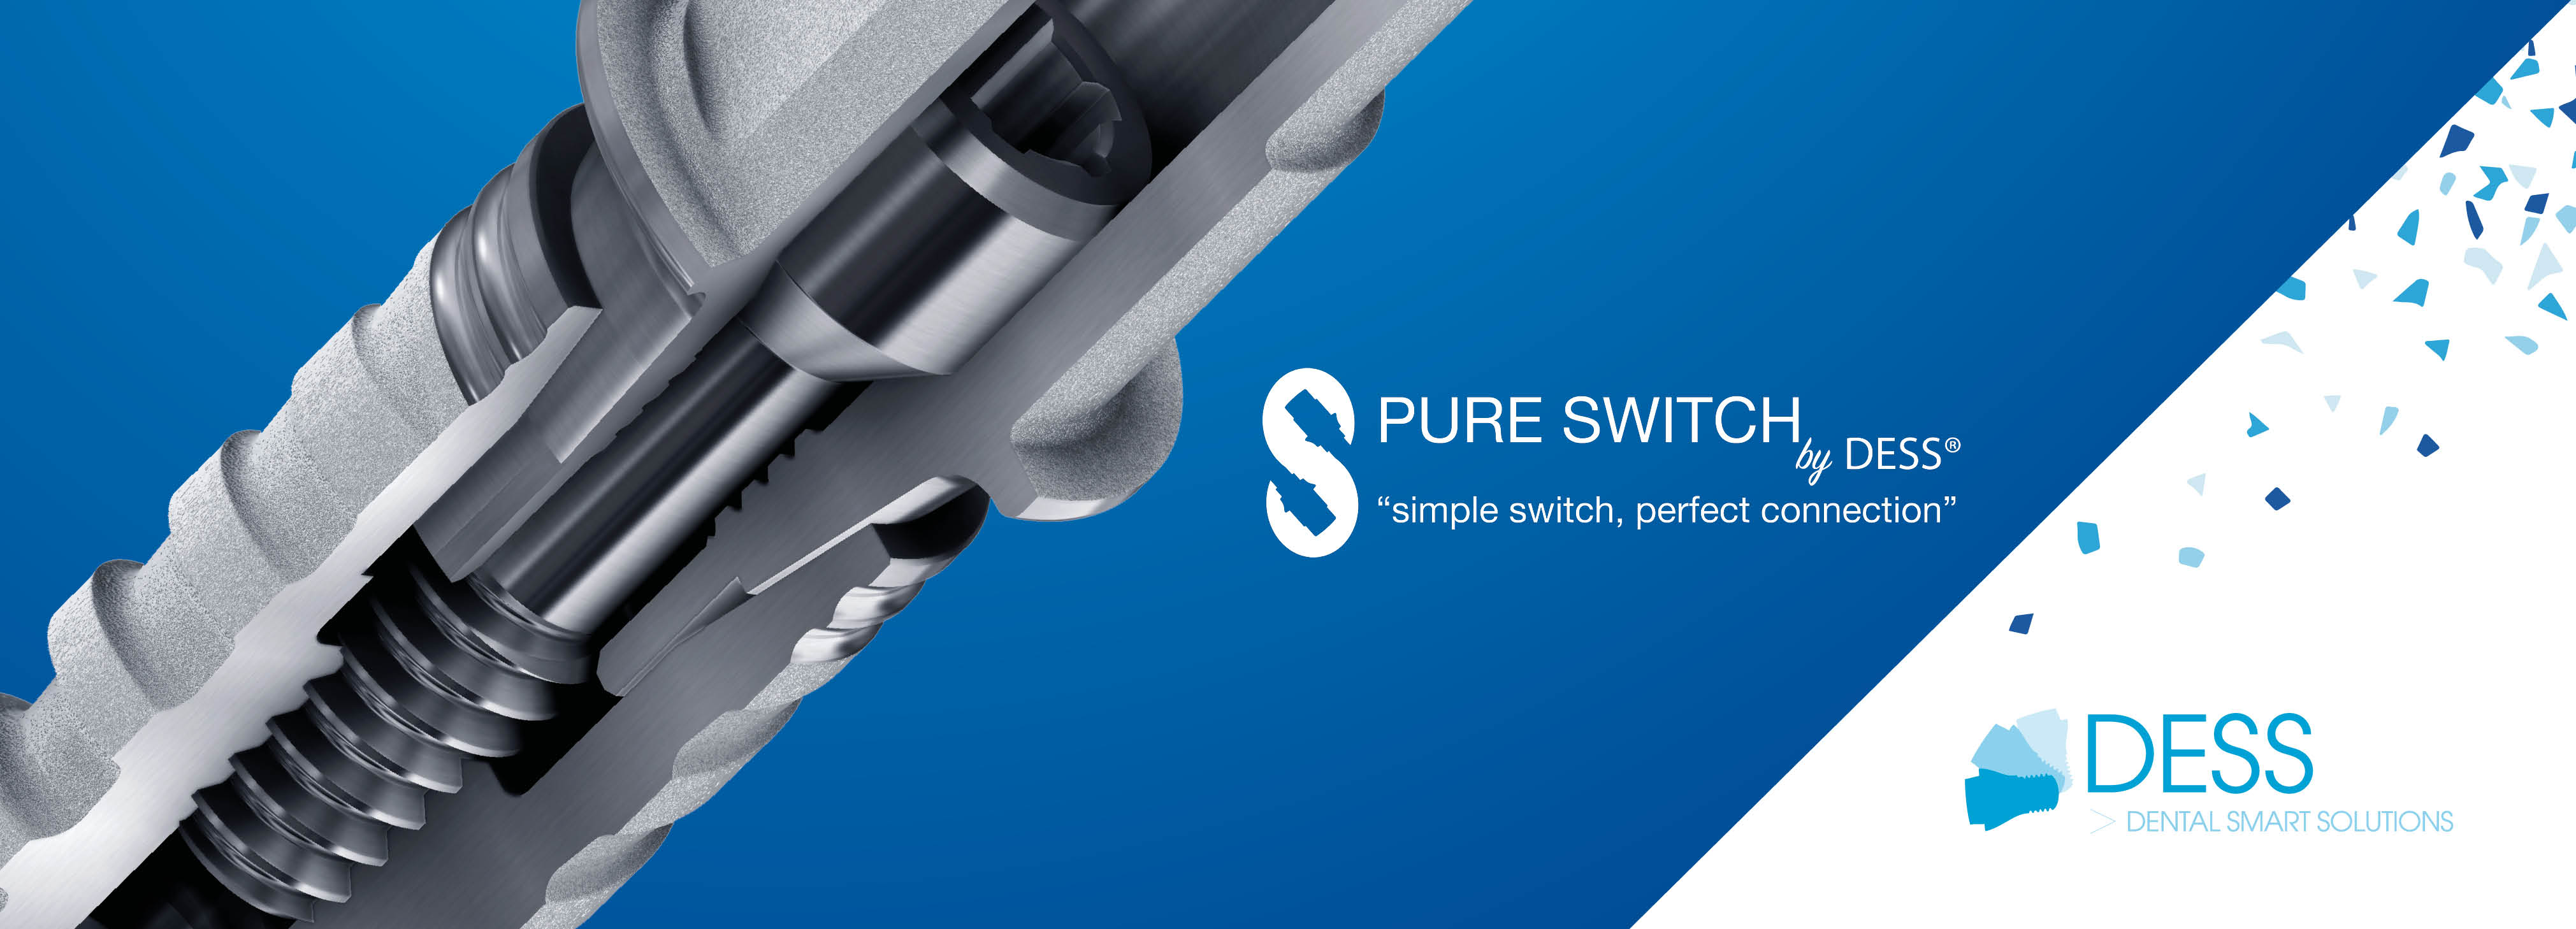 What is Pure Switch? A story about the art of switching on DESS® Dental